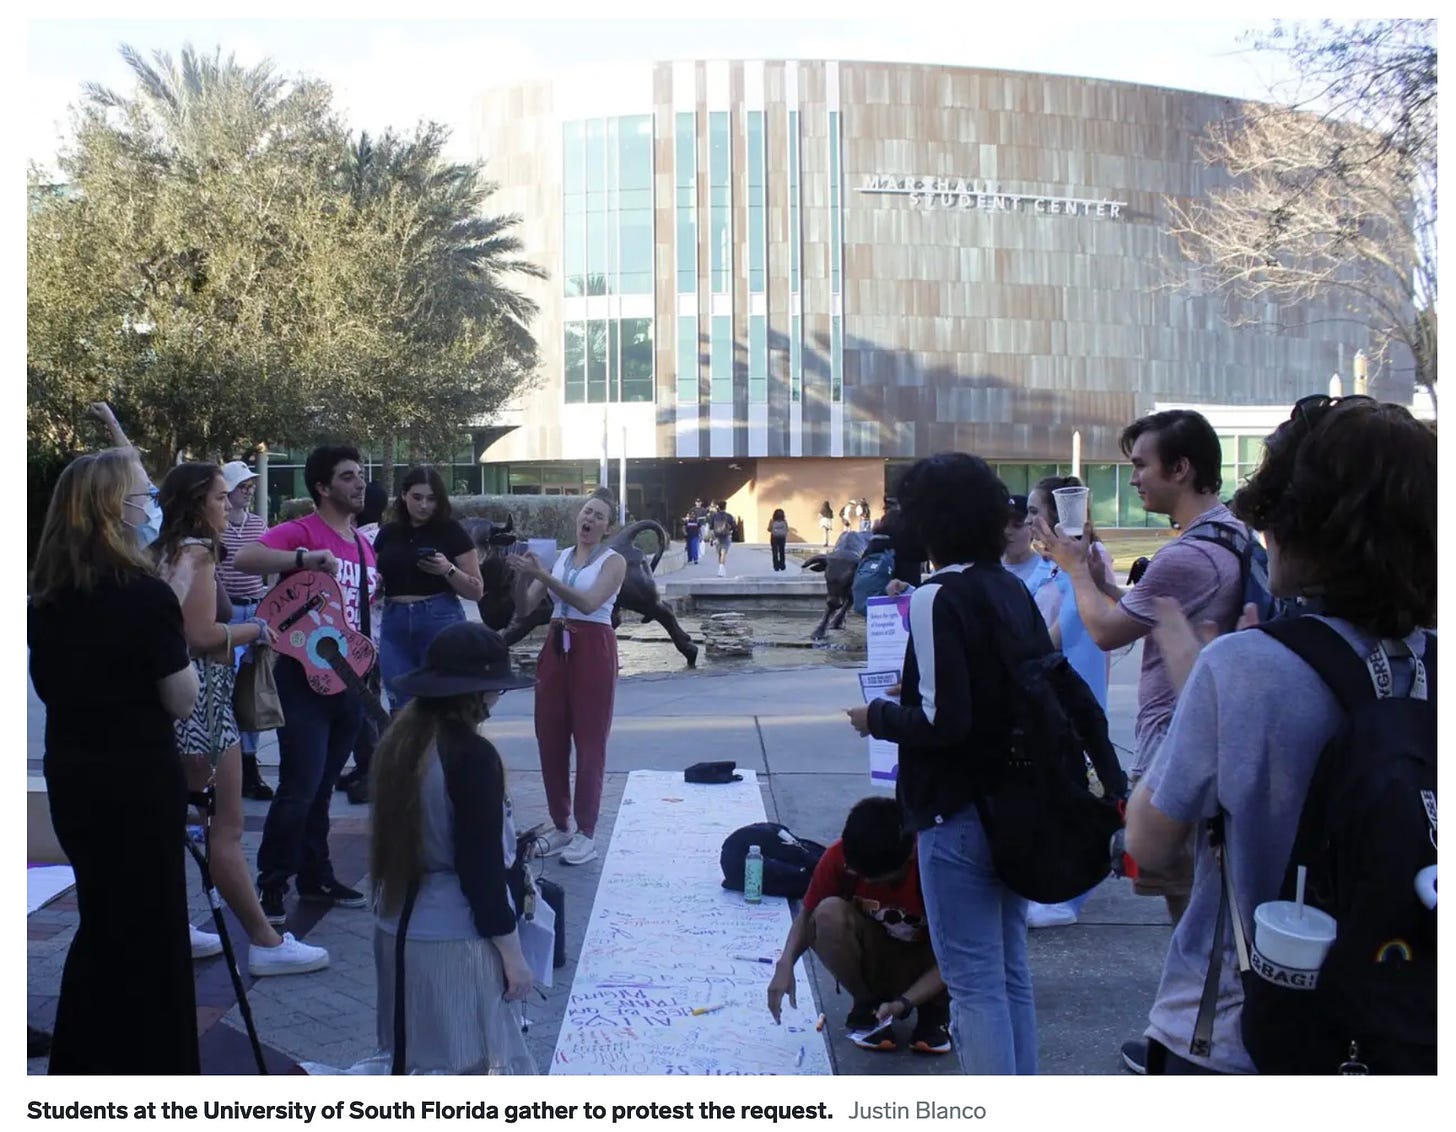 Students at the University of South Florida gather to protest the request. Justin Blanco